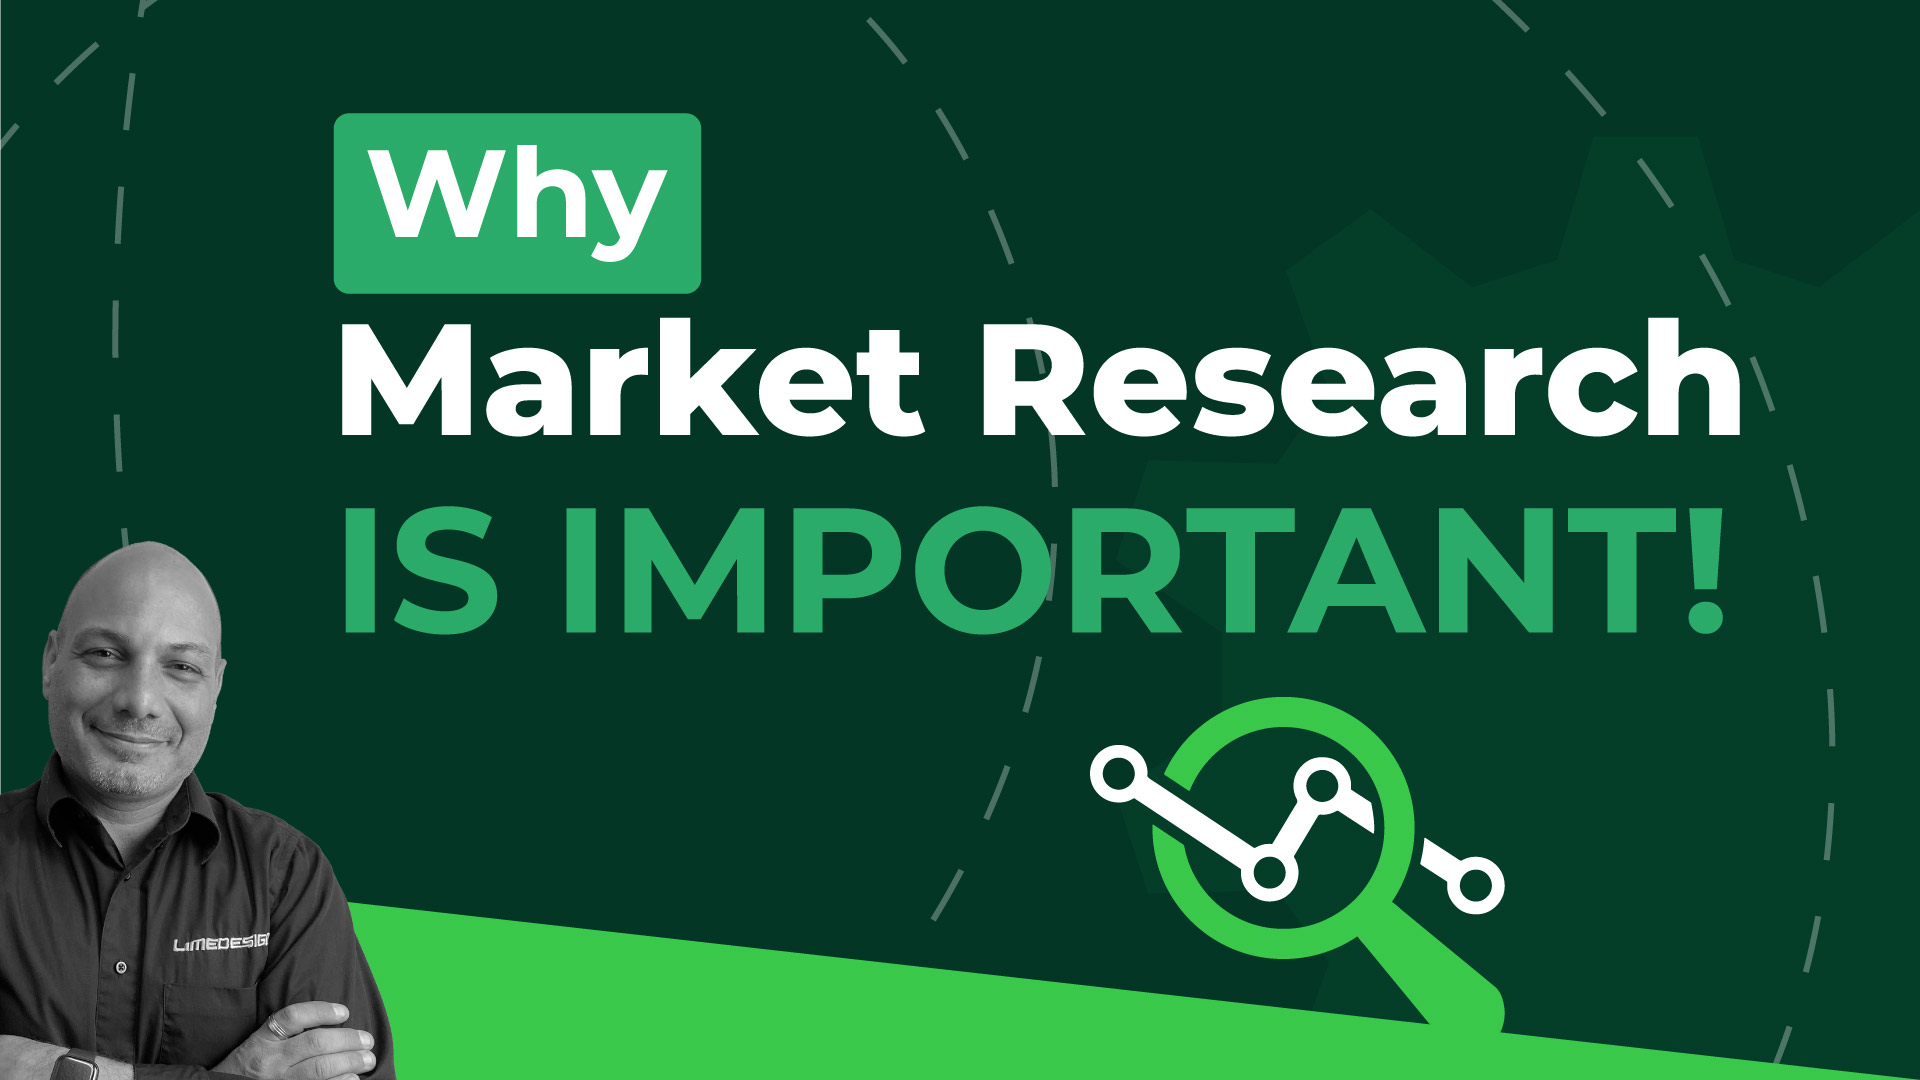 market research important green graphic banner